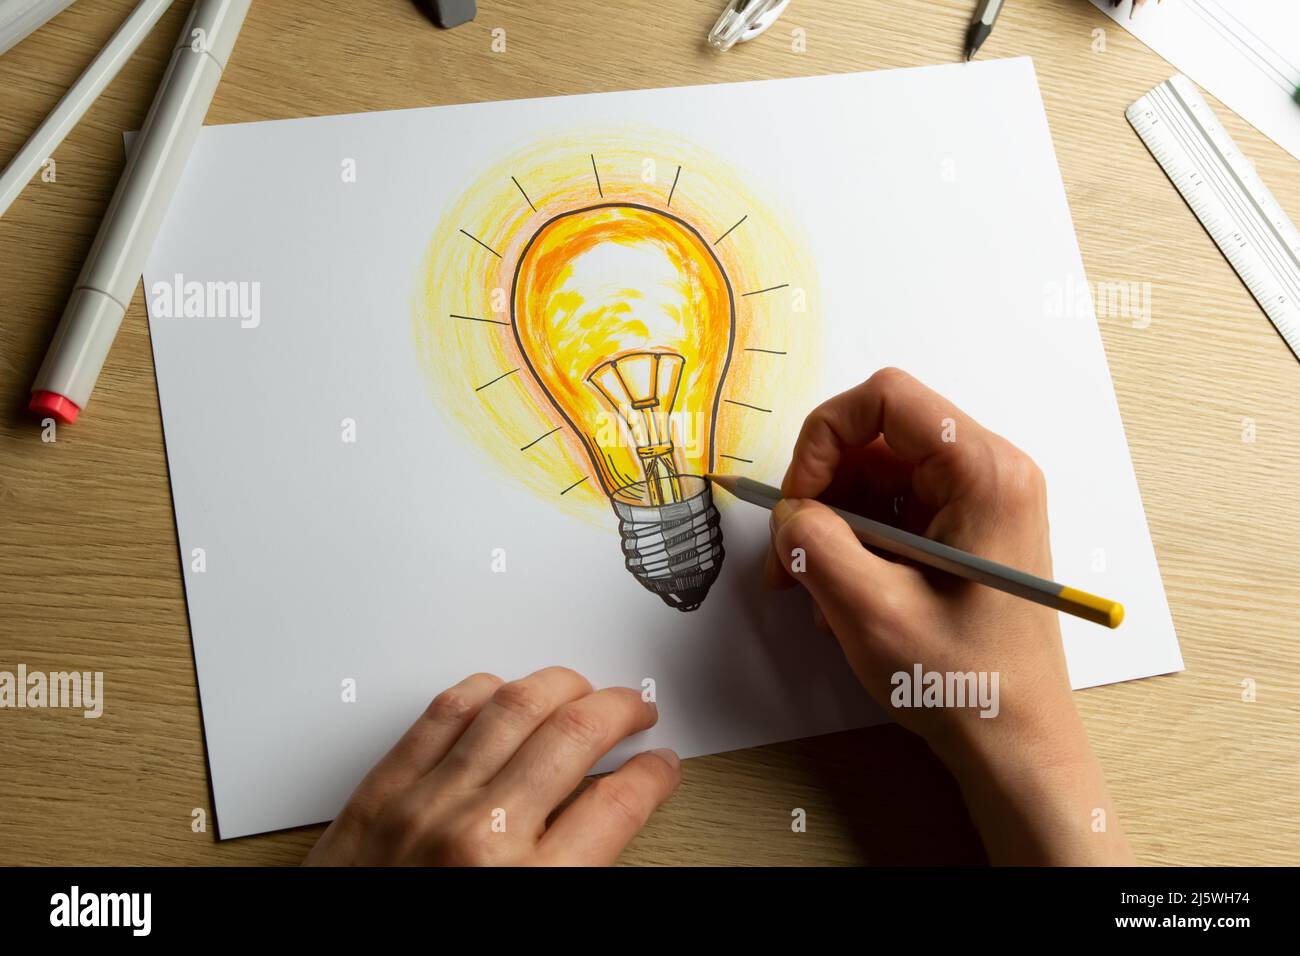 Bright idea concept. Lamp drawing. Strategy planning. Stock Photo